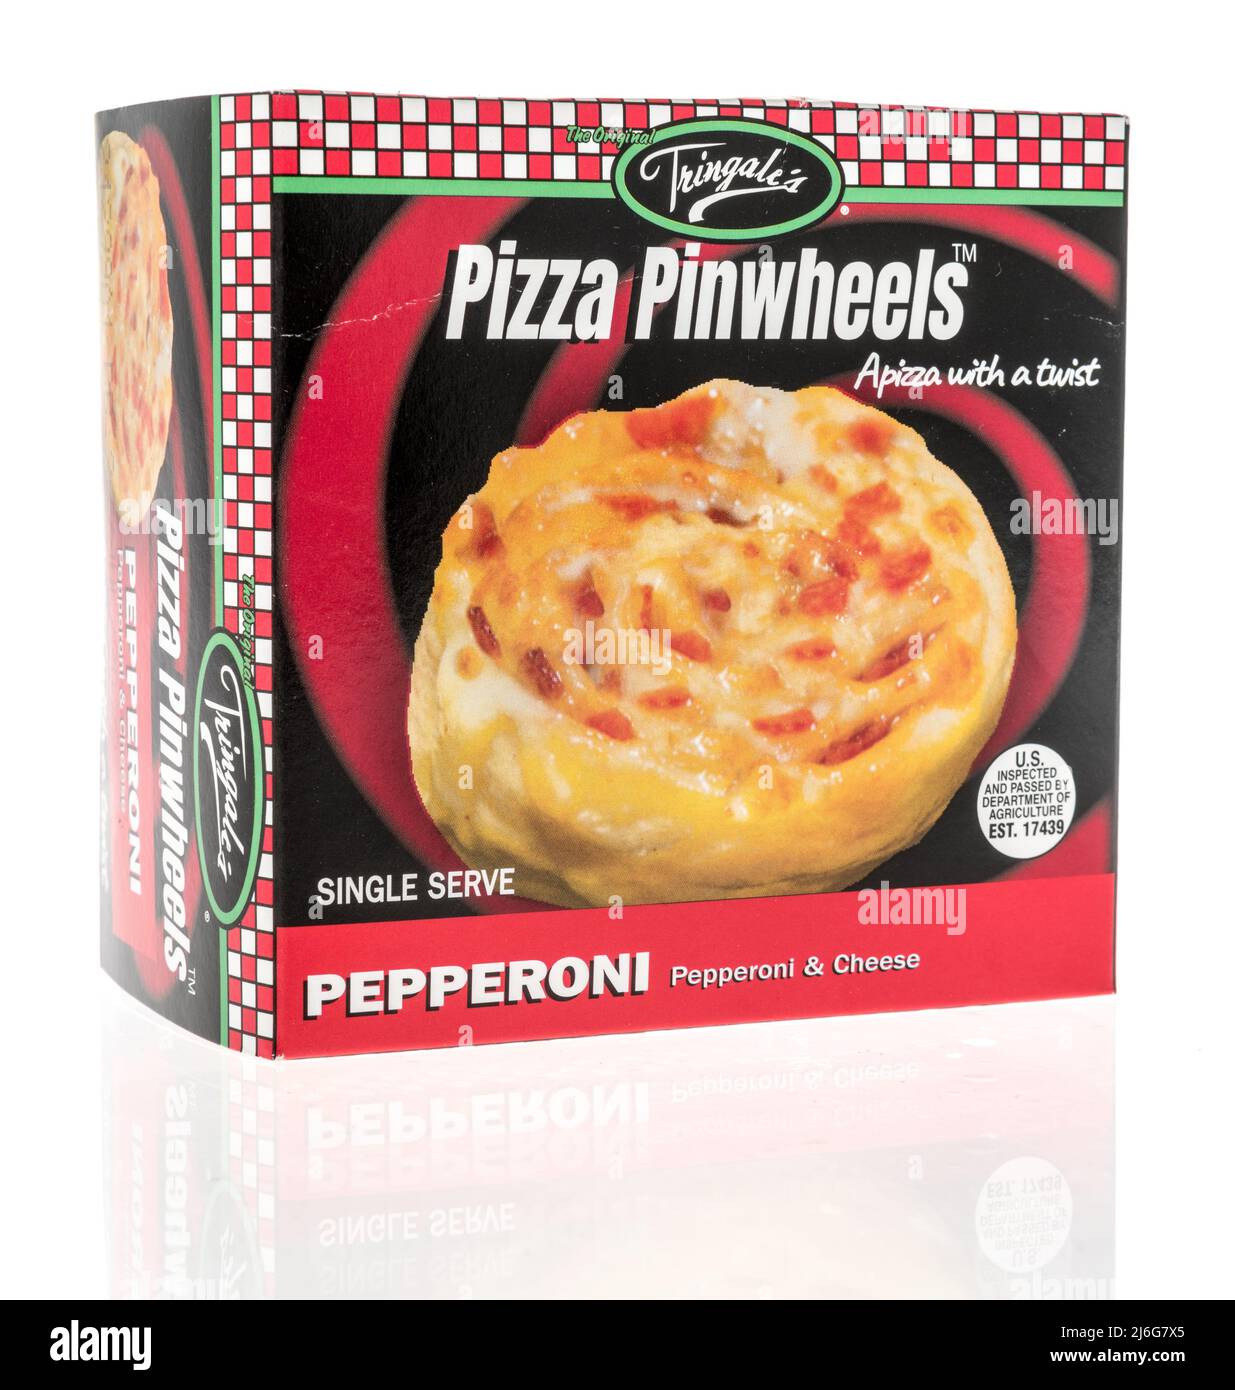 Winneconne, WI -23 April 2022: A package of Tringales pizza pinwheels pepperoni on an isolated background Stock Photo